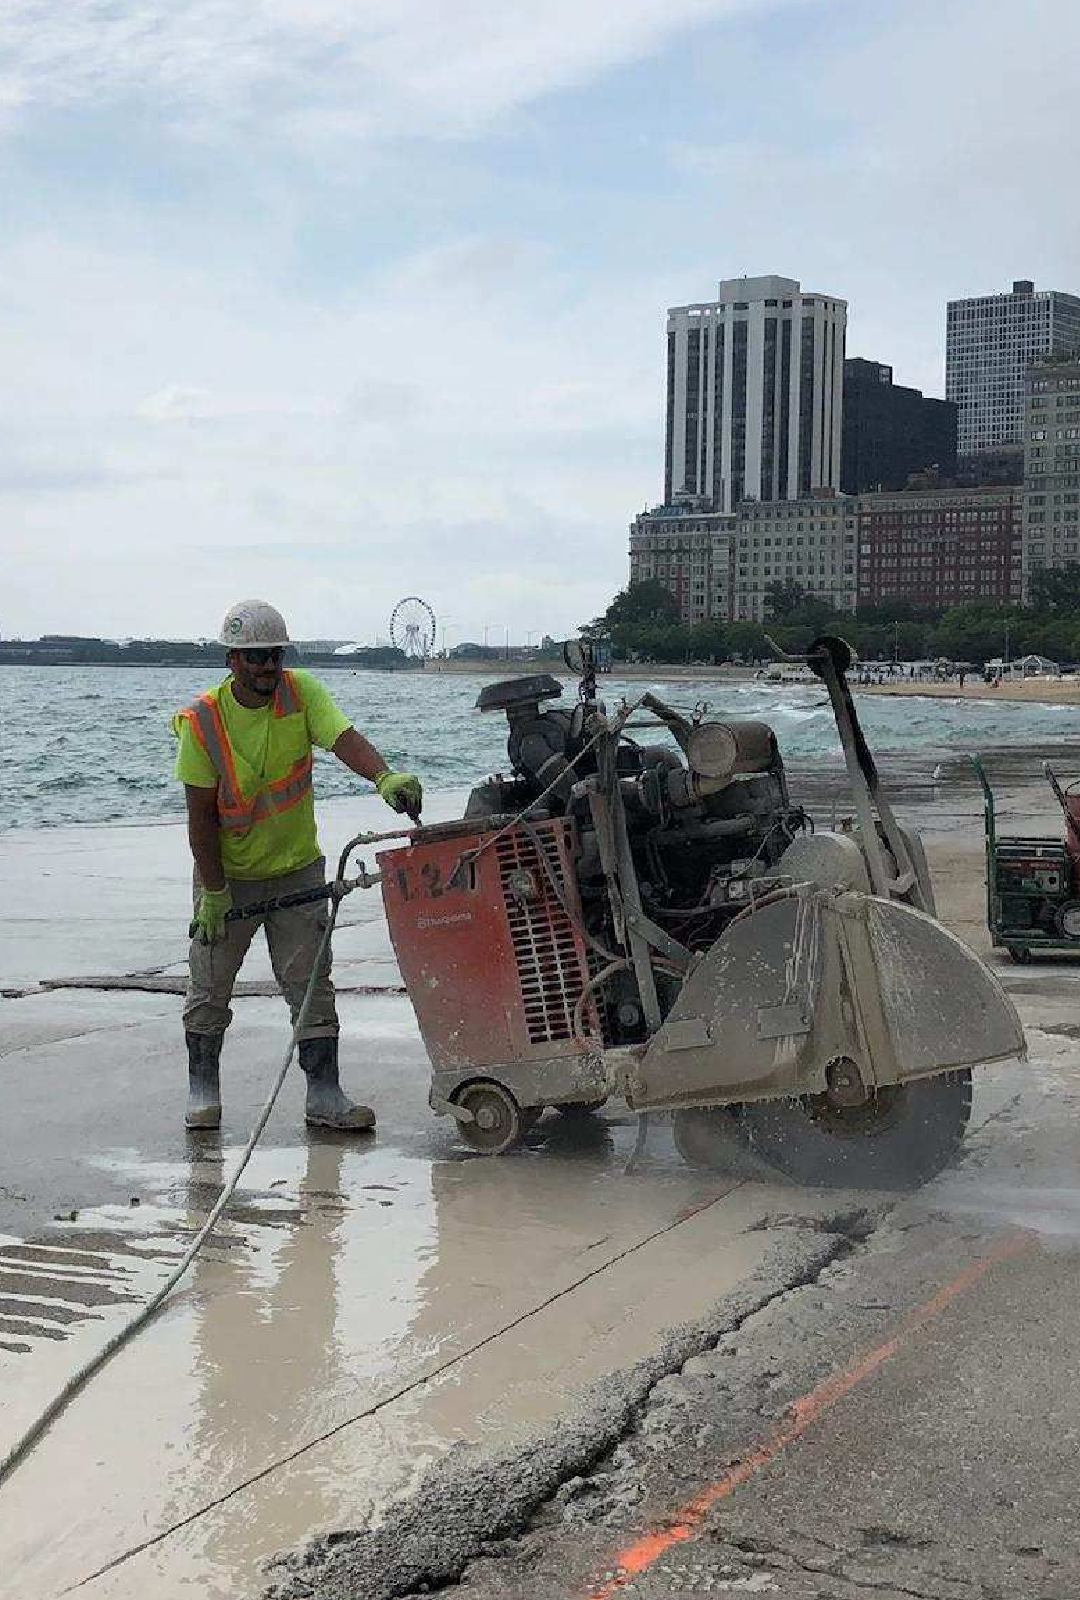 A man is cutting concrete with a circular saw on the beach.